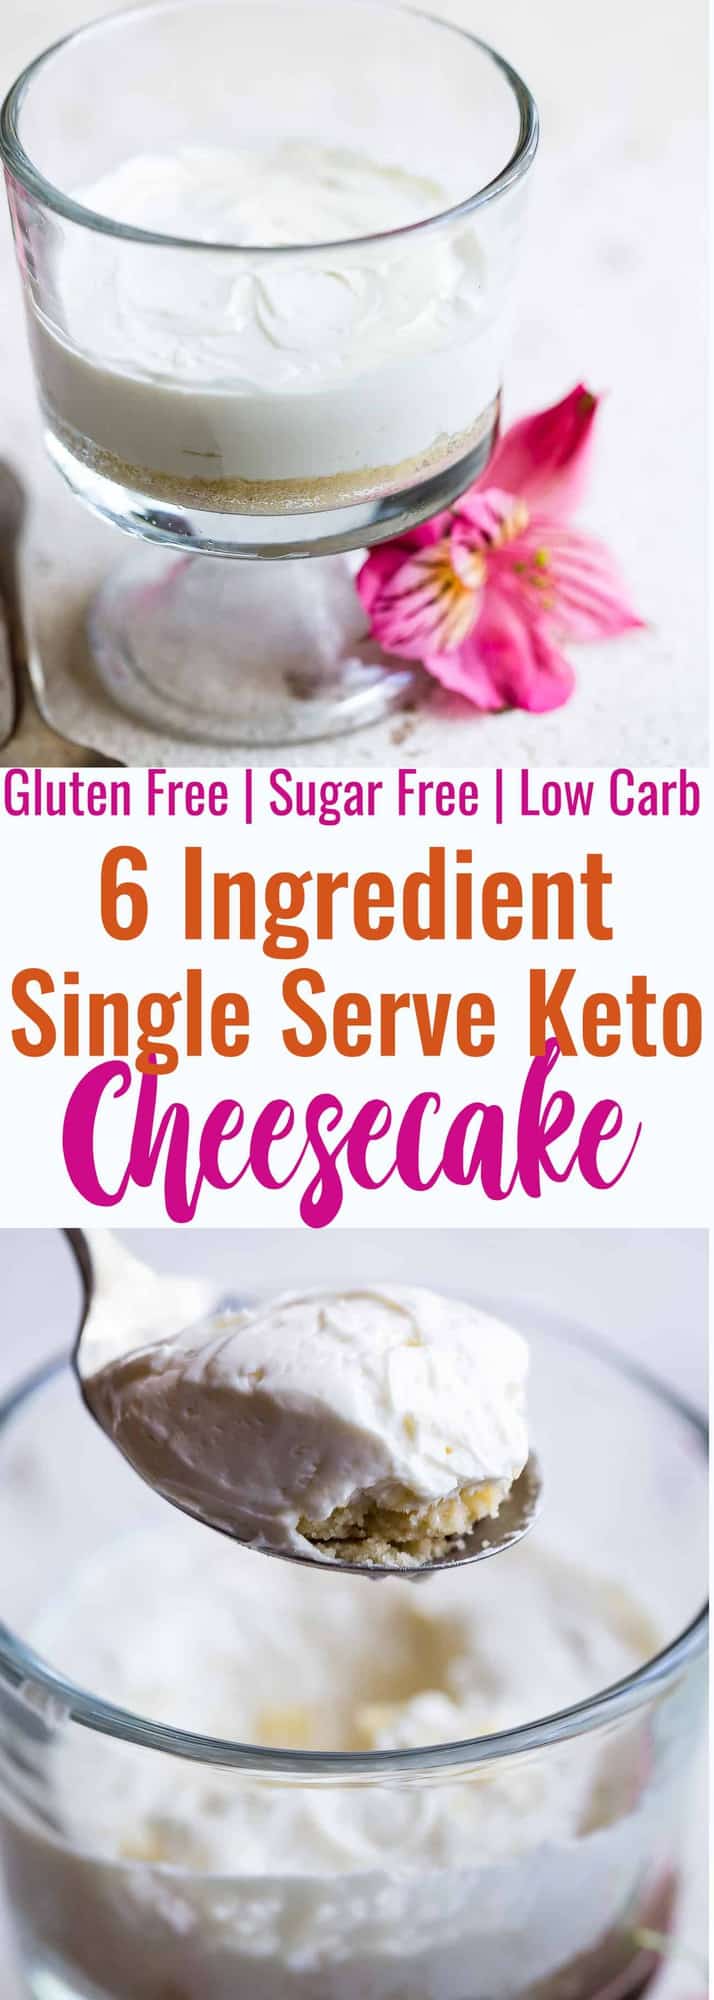 Easy Sugar Free No Bake Keto Cheesecake For One - Only 5 ingredients and gluten/grain/sugar free, low carb, keto friendly and protein PACKED! The BEST way to get your healthy dessert fix because you don't have to share! | #Foodfaithfitness | #Glutenfree #Keto #Lowcarb #Sugarfree #Cheesecake